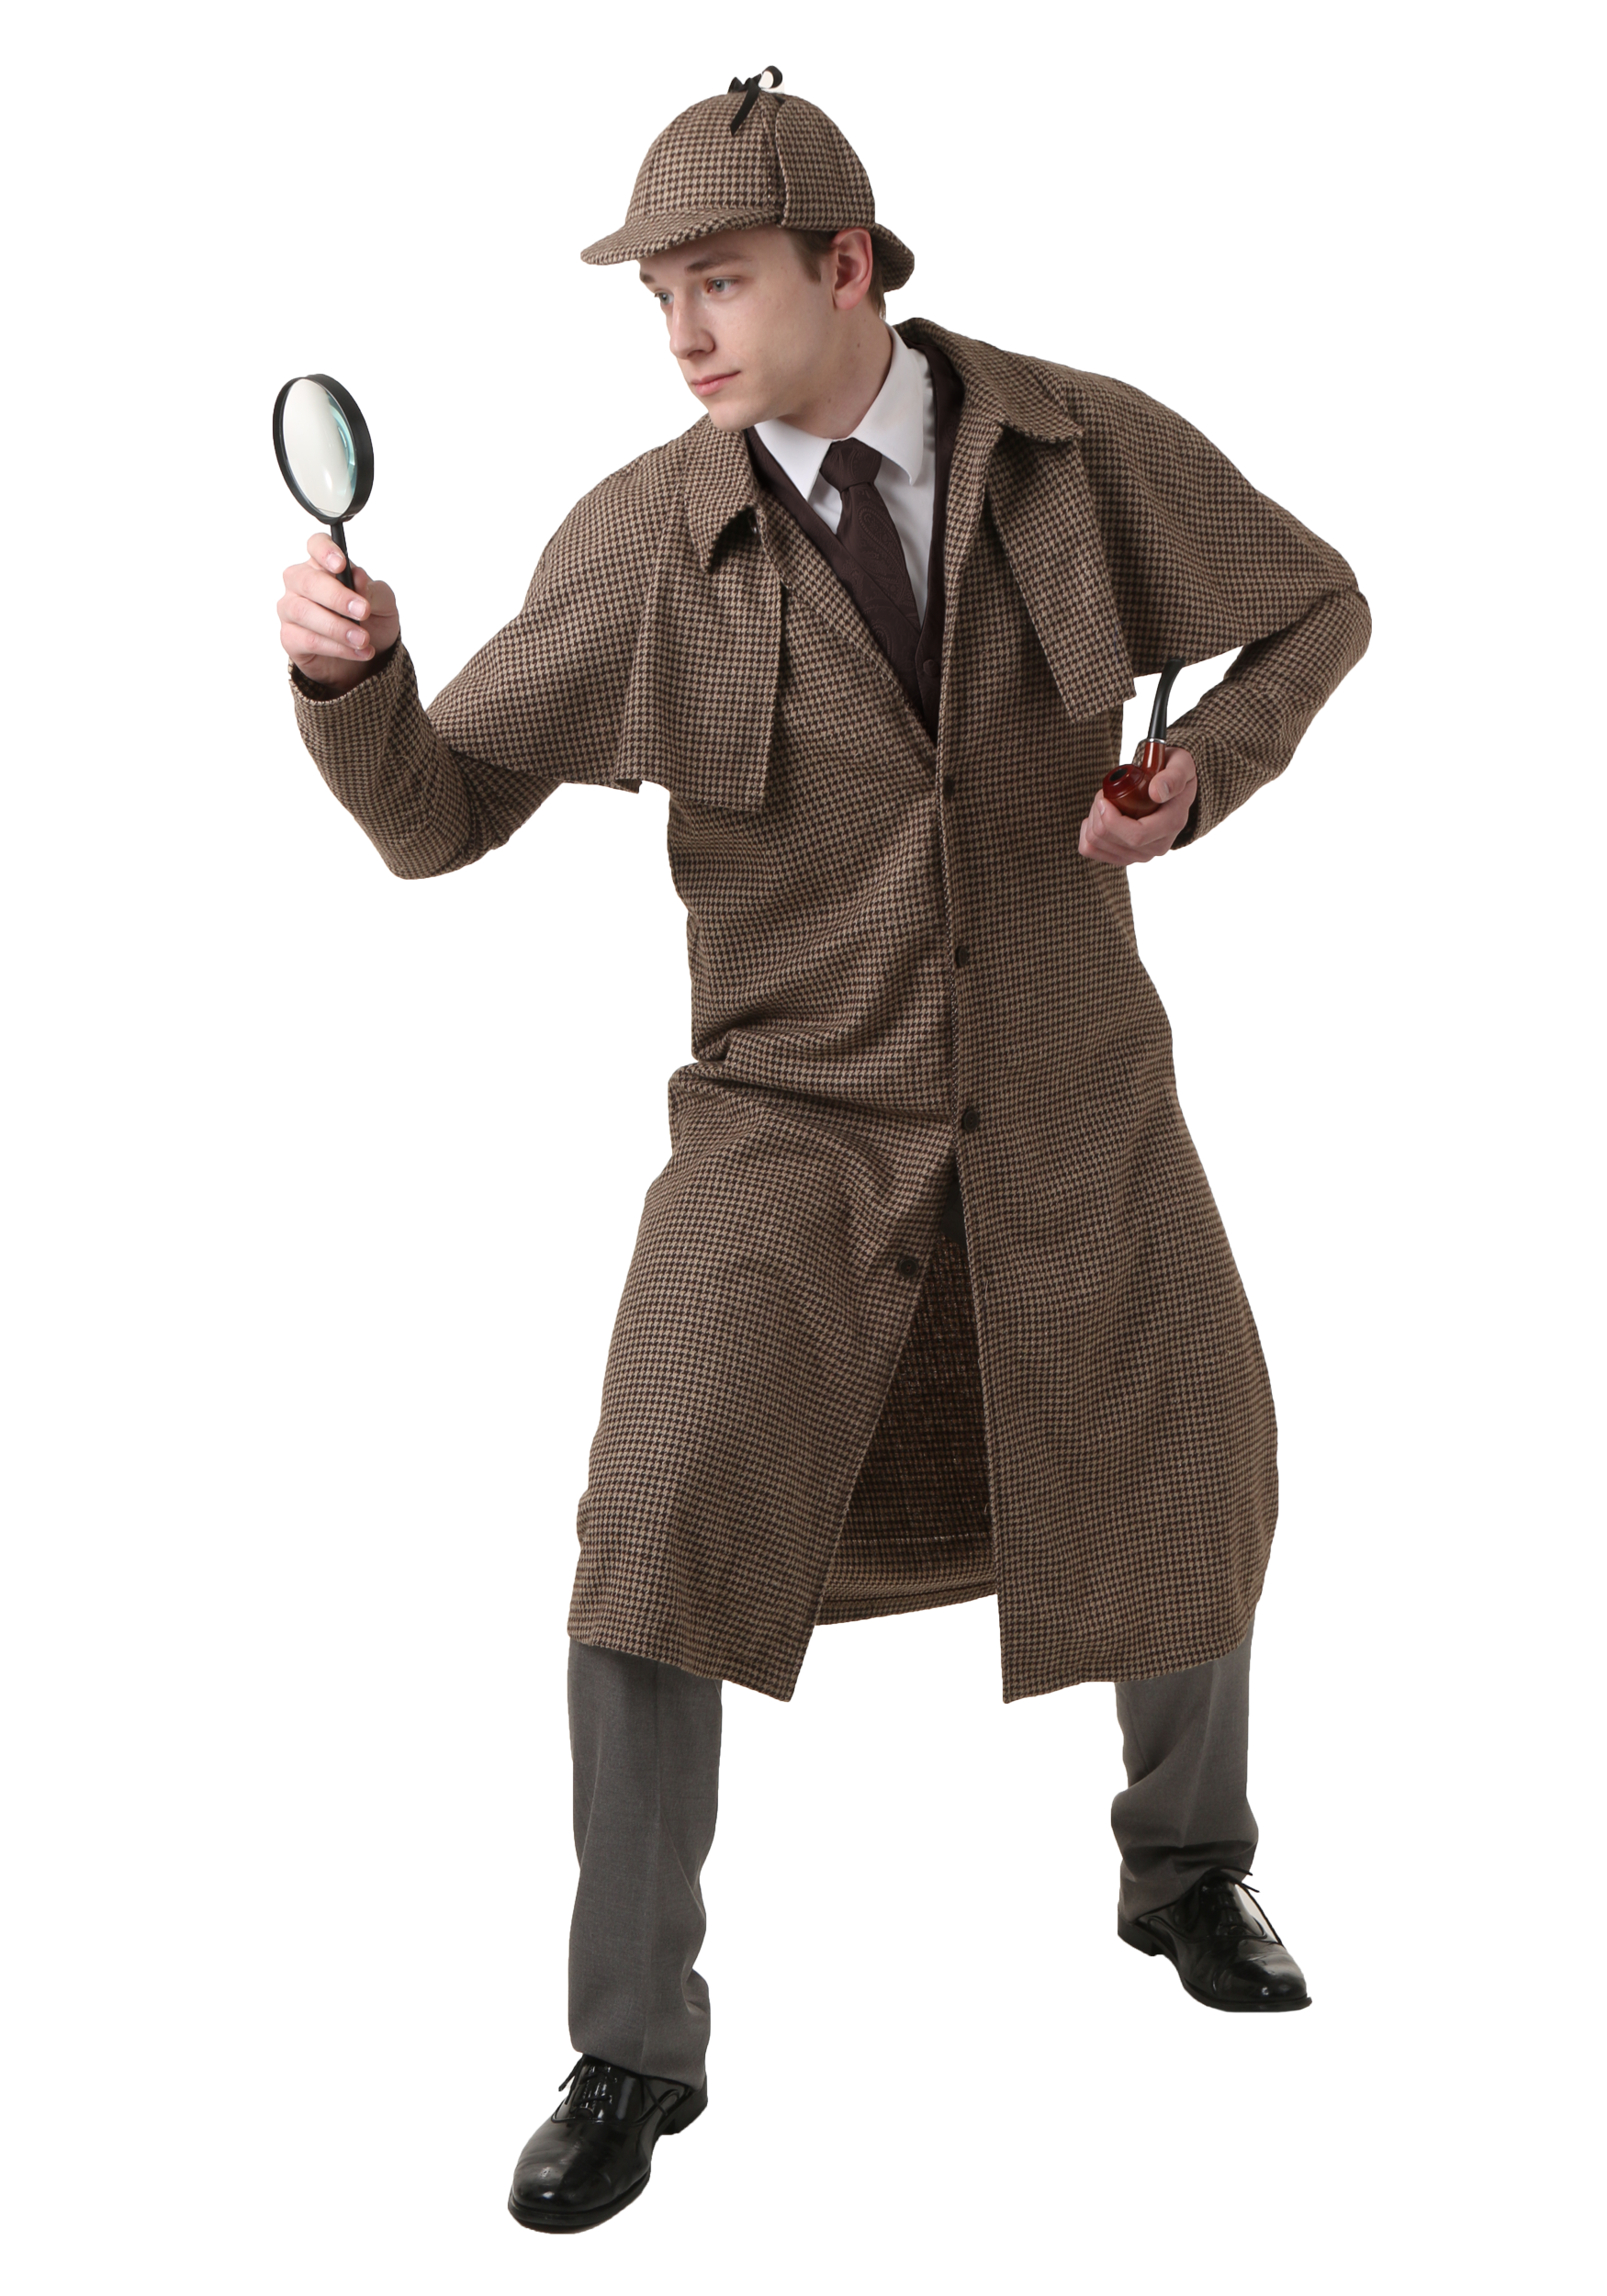 http://images.halloweencostumes.com/products/32854/1-1/plus-size-sherlock-holmes-costume.png